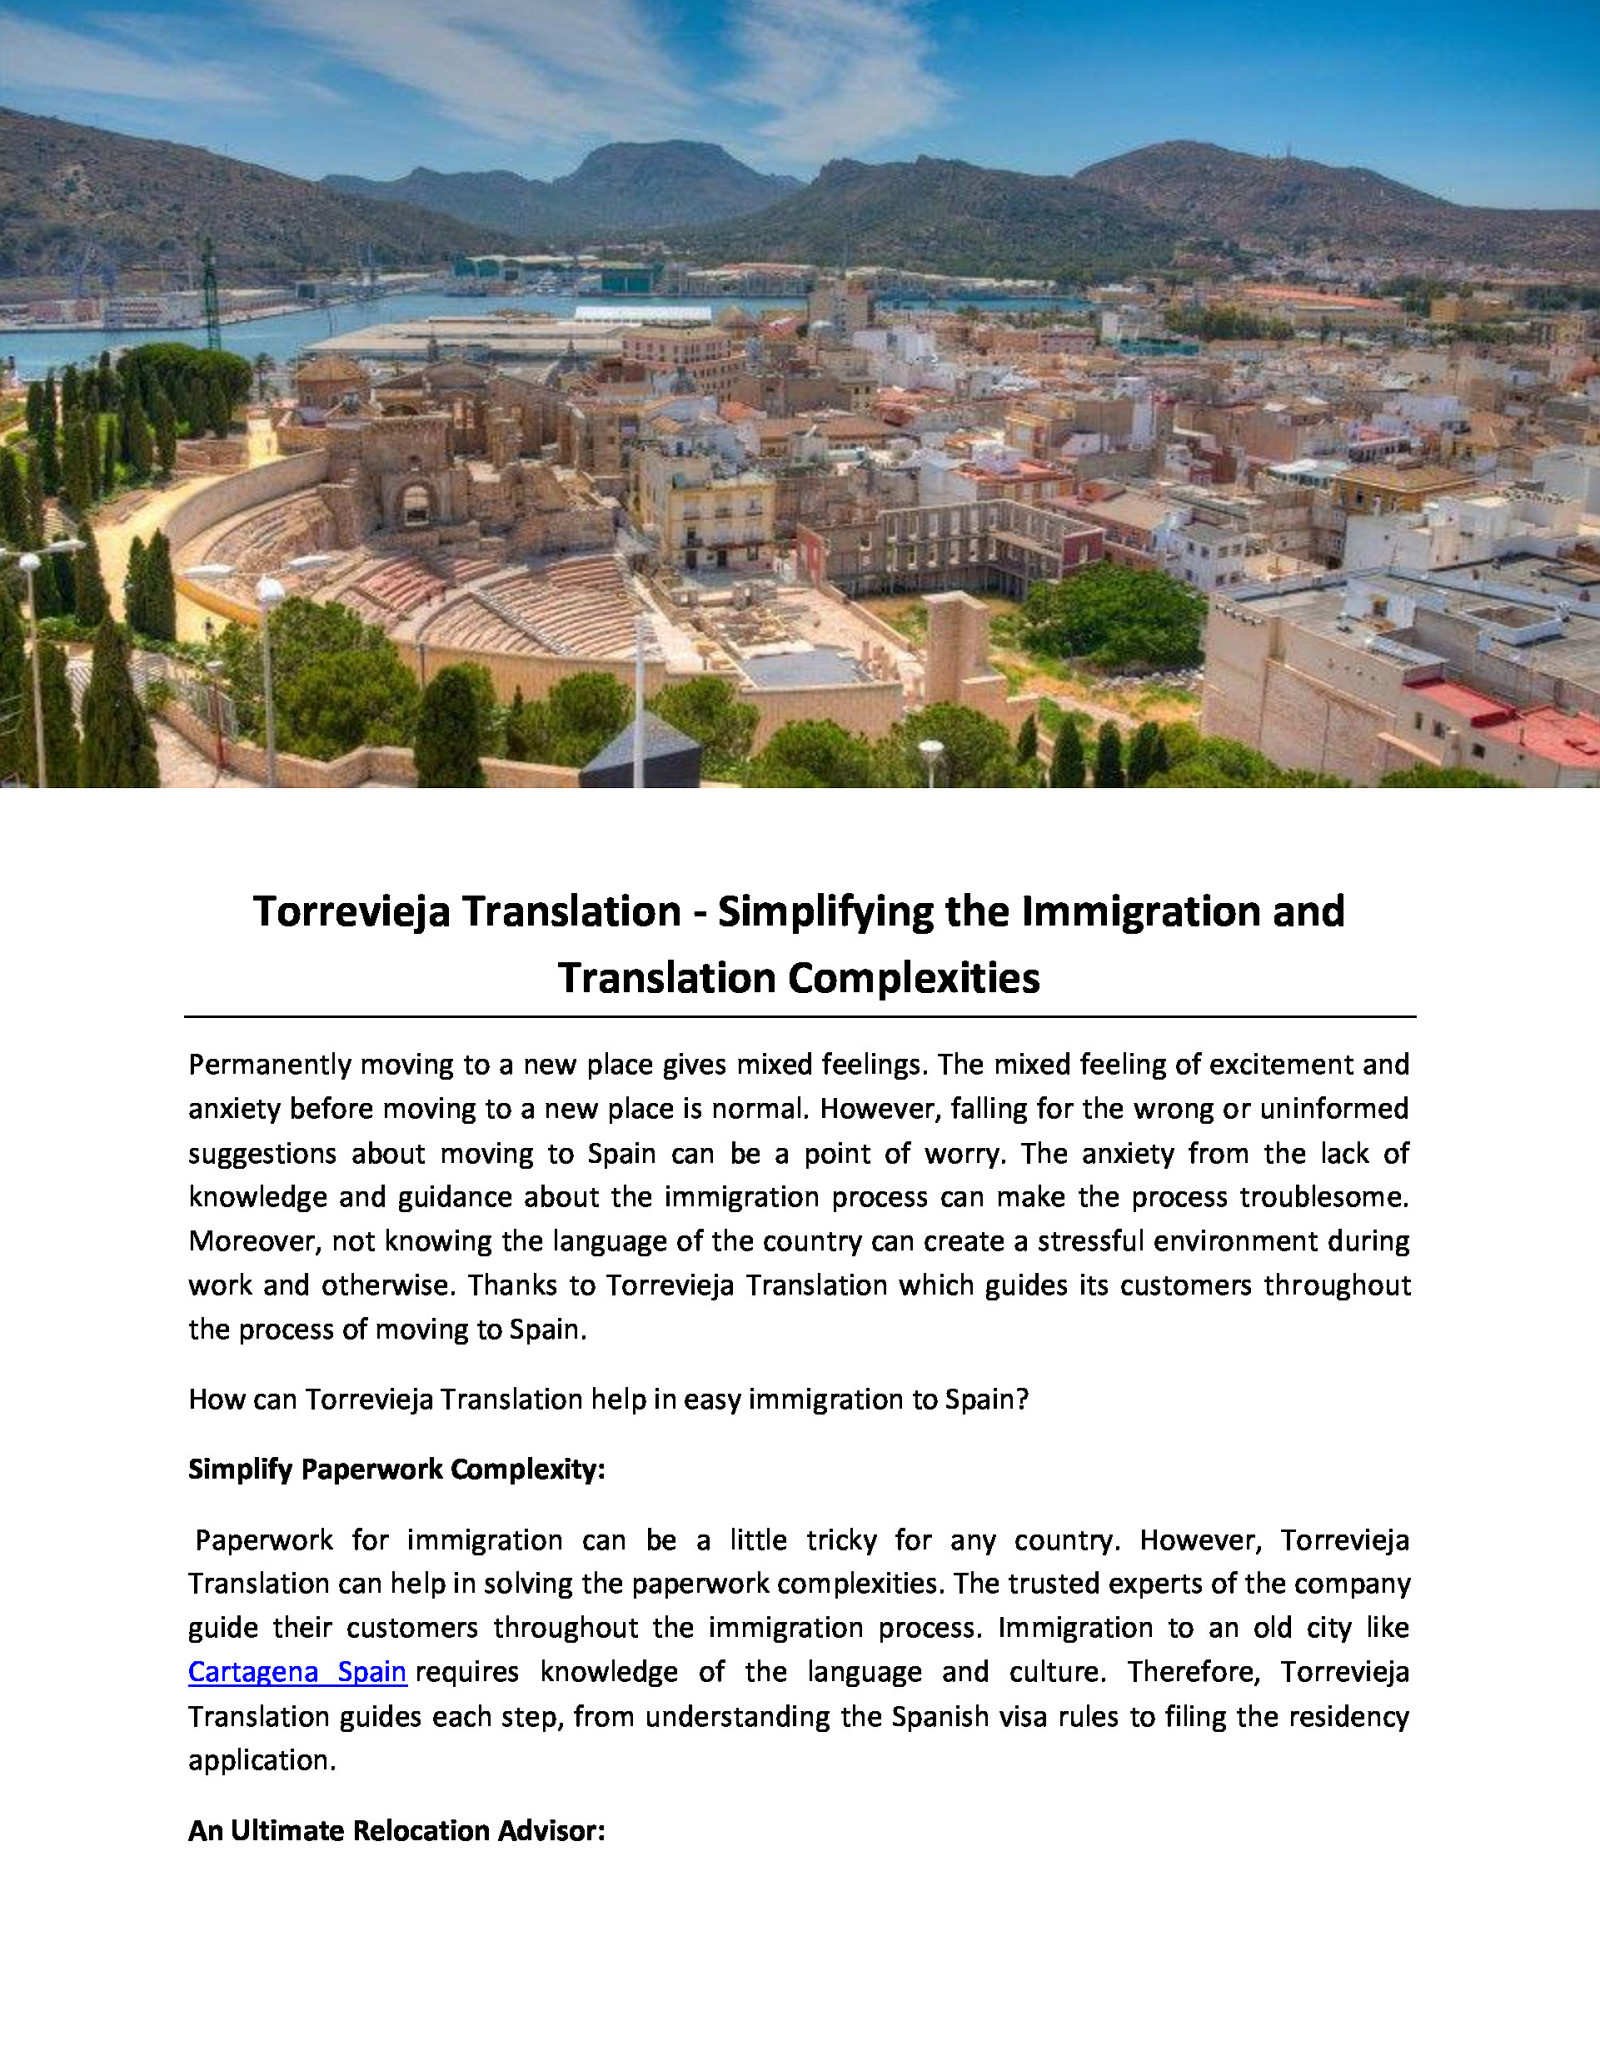 Torrevieja Translation - Simplifying the Immigration and Translation Complexities